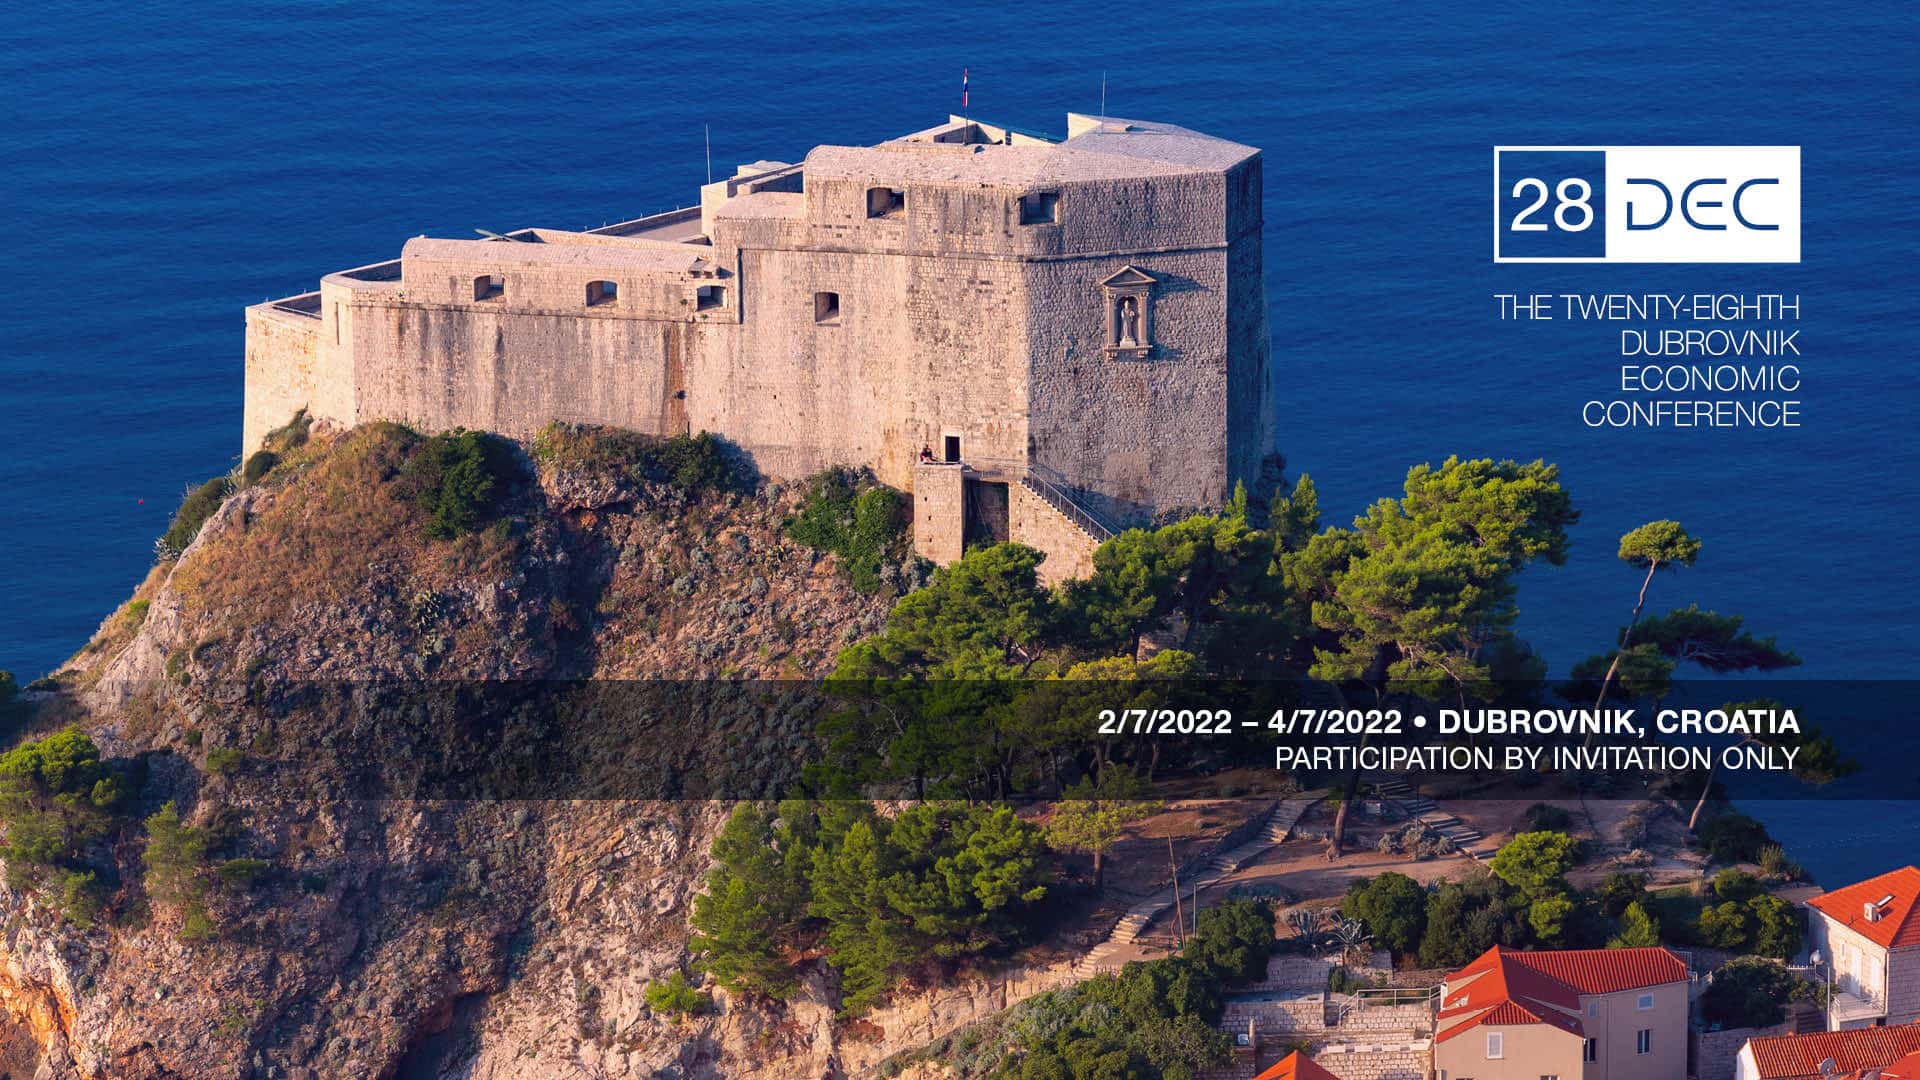 The 28th Dubrovnik Economic Conference